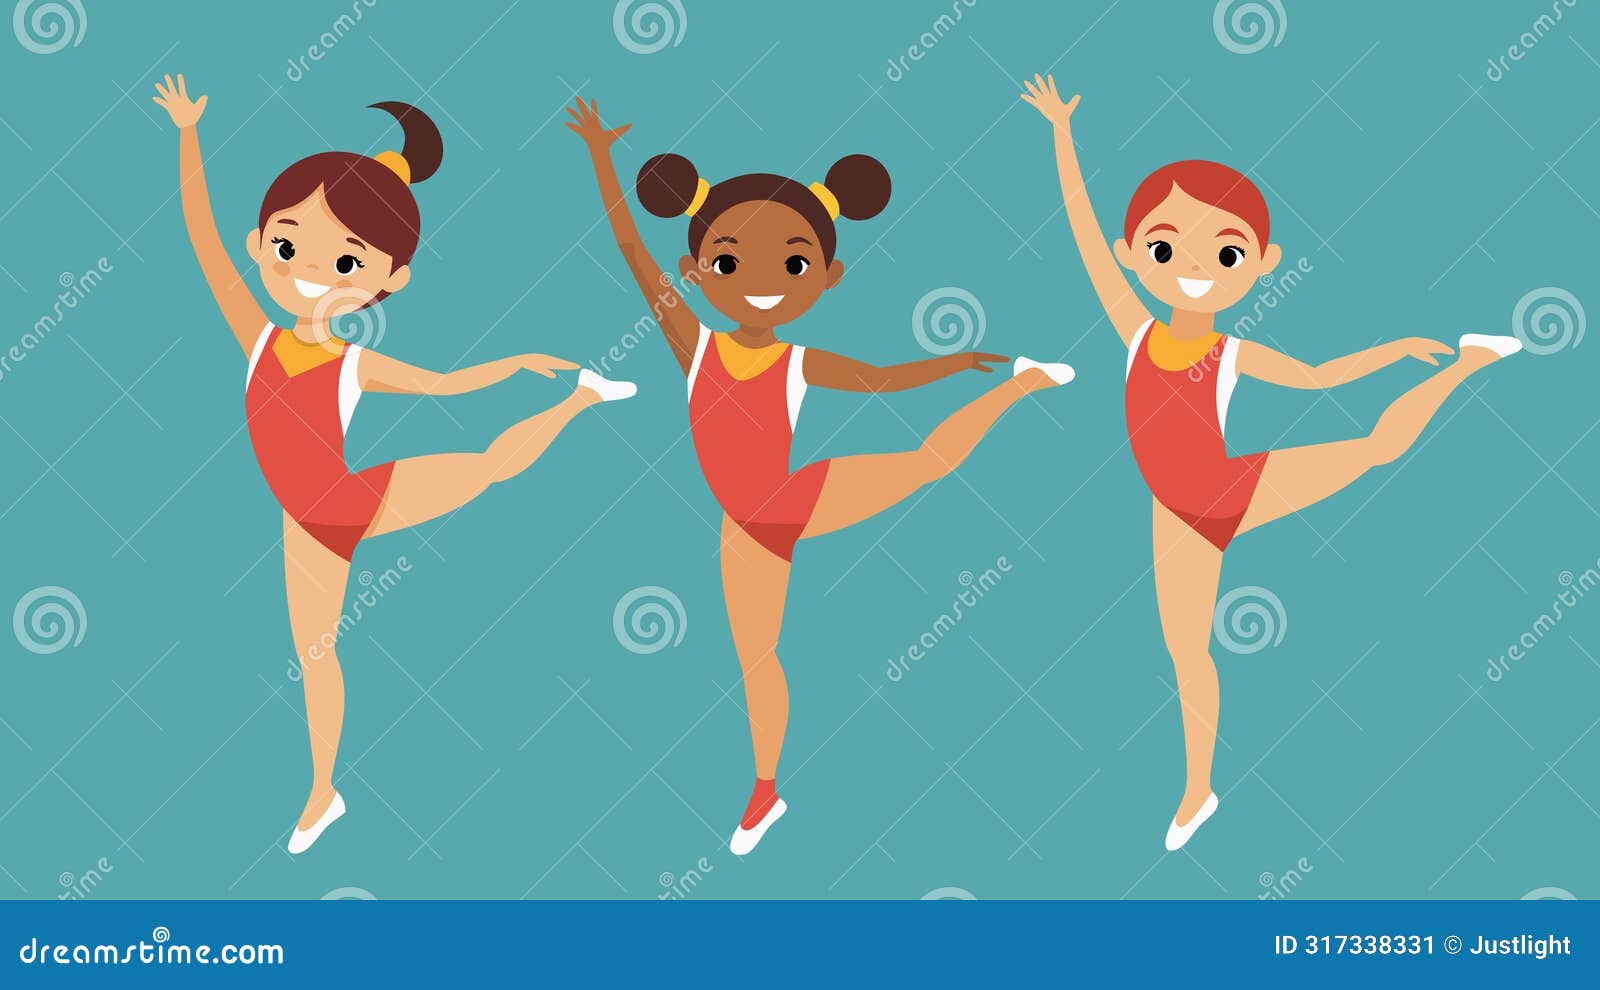 dressed in matching leotards a team of young girls confidently take on the vault with leaps and flips that defy their